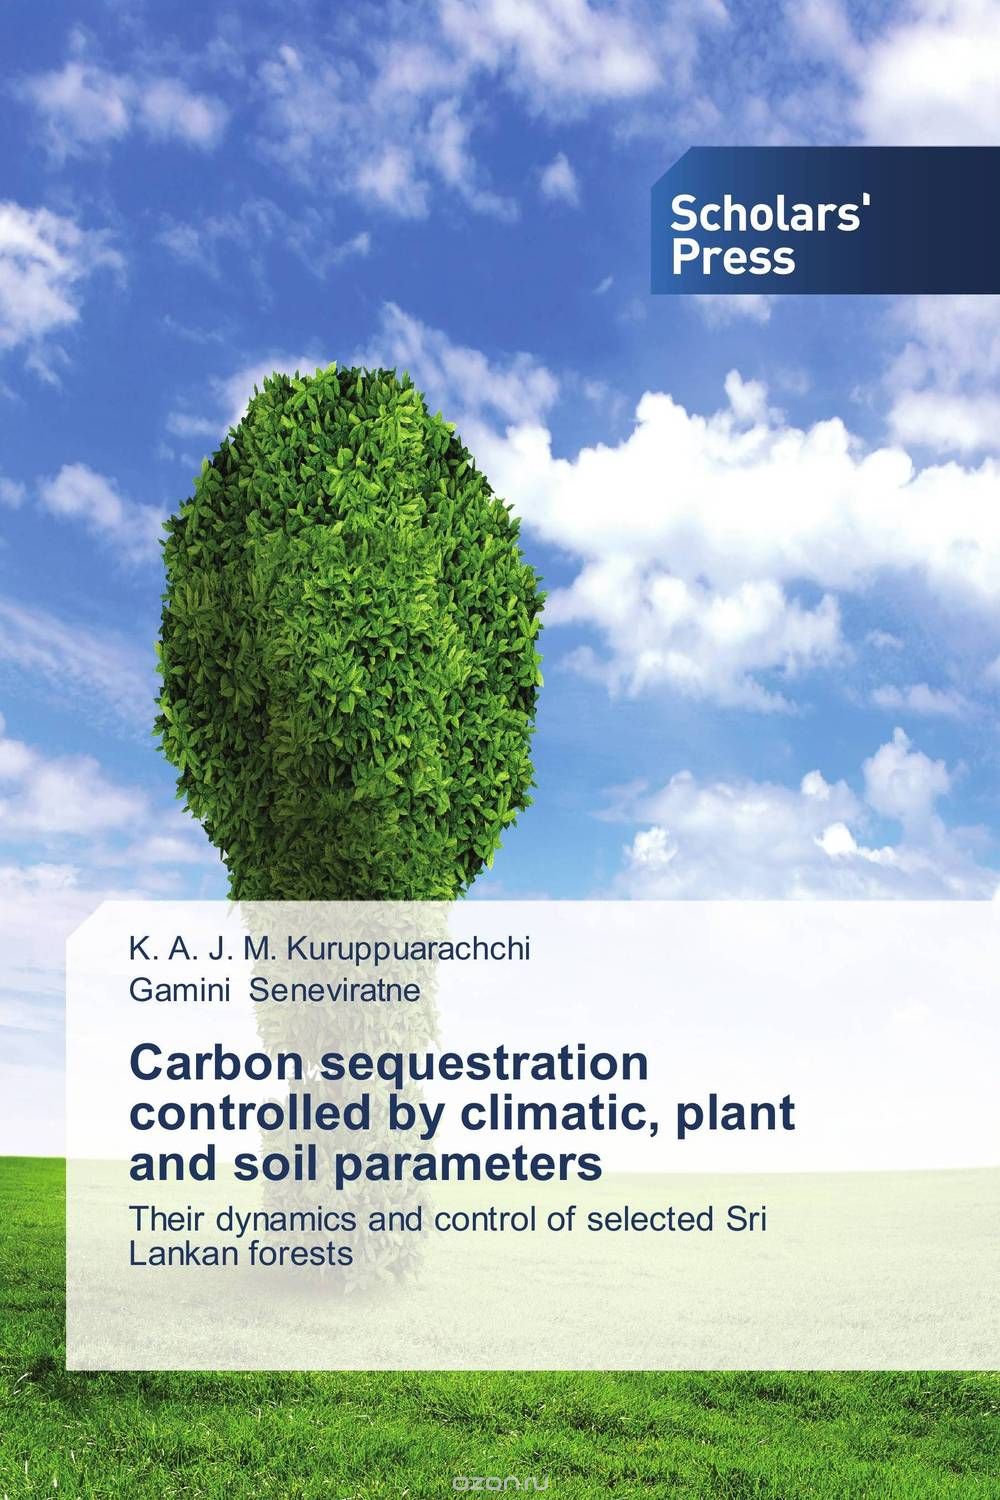 Скачать книгу "Carbon sequestration controlled by climatic, plant and soil parameters"